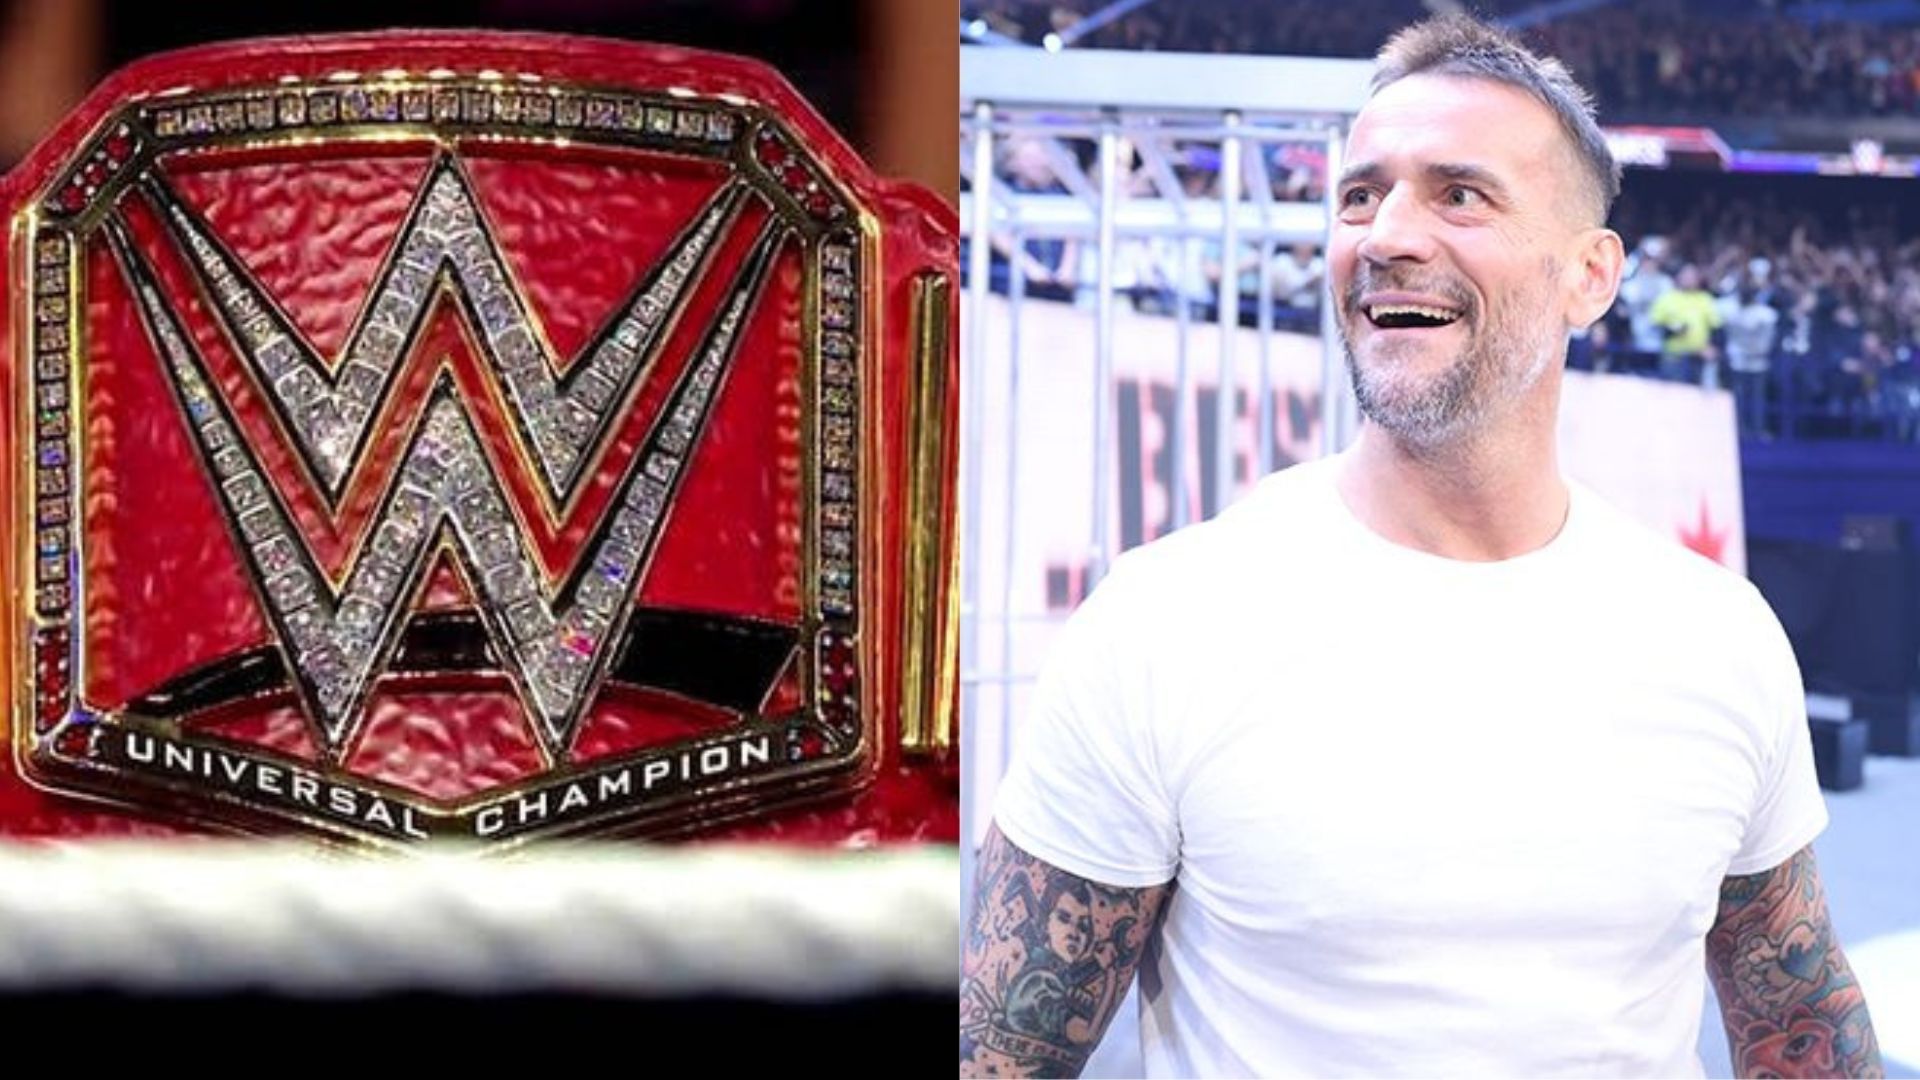 CM Punk is yet to compete in a match since returning to WWE